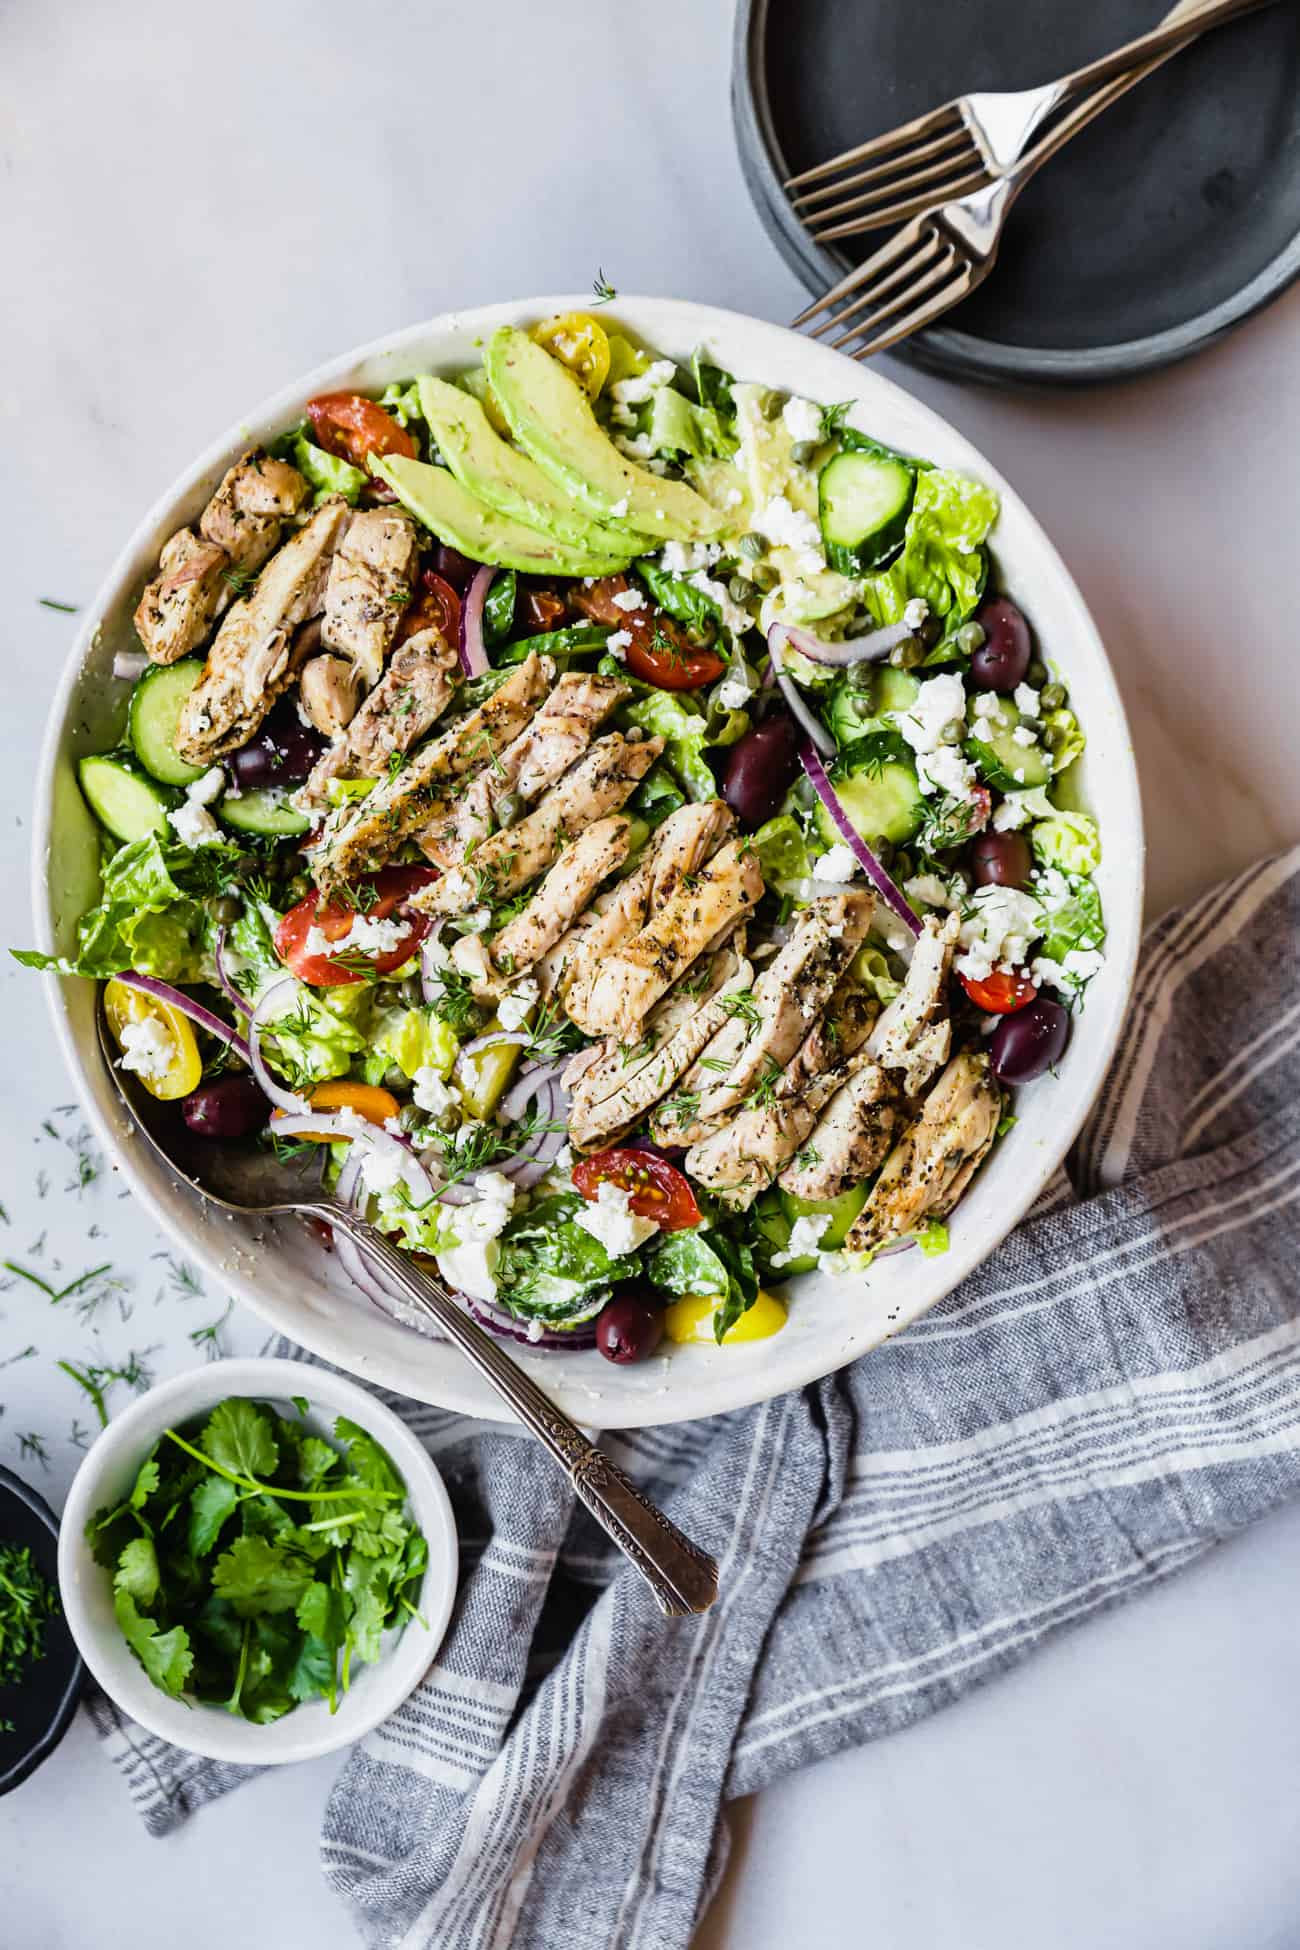 Healthy chicken salad with avocado on top and greens